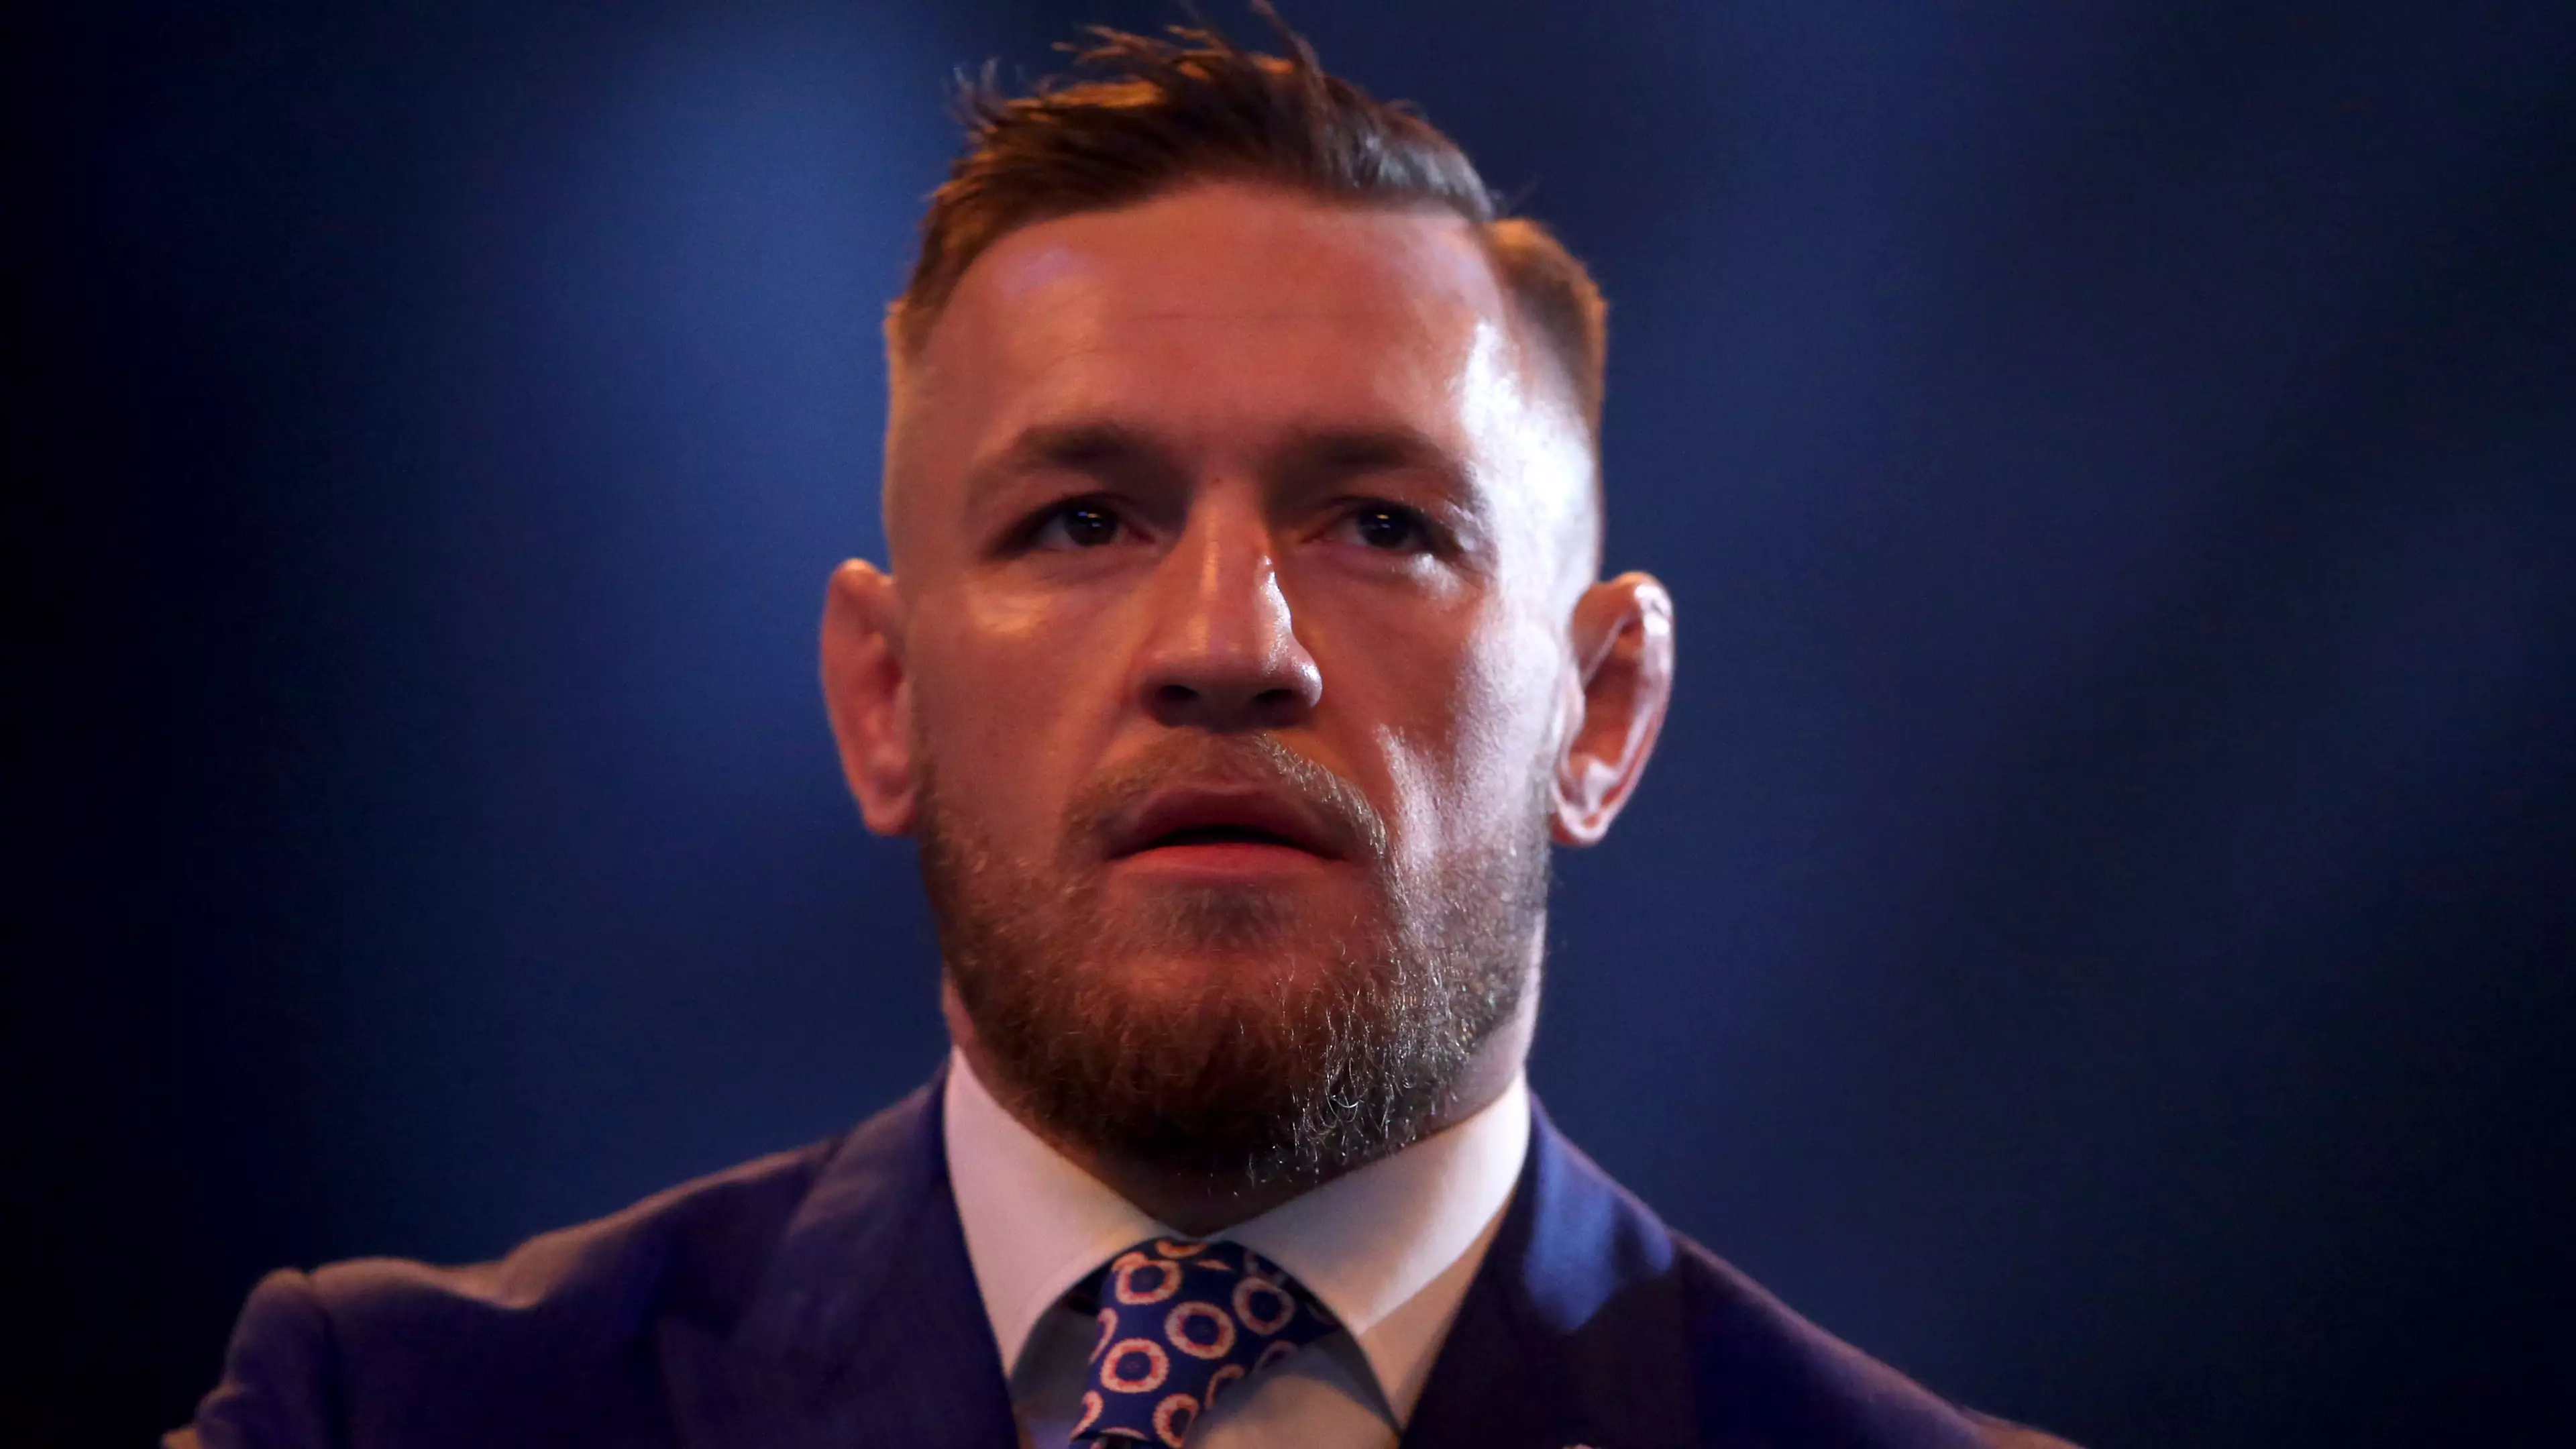 Conor McGregor Responds To Calls For Him To Fight Jake Paul